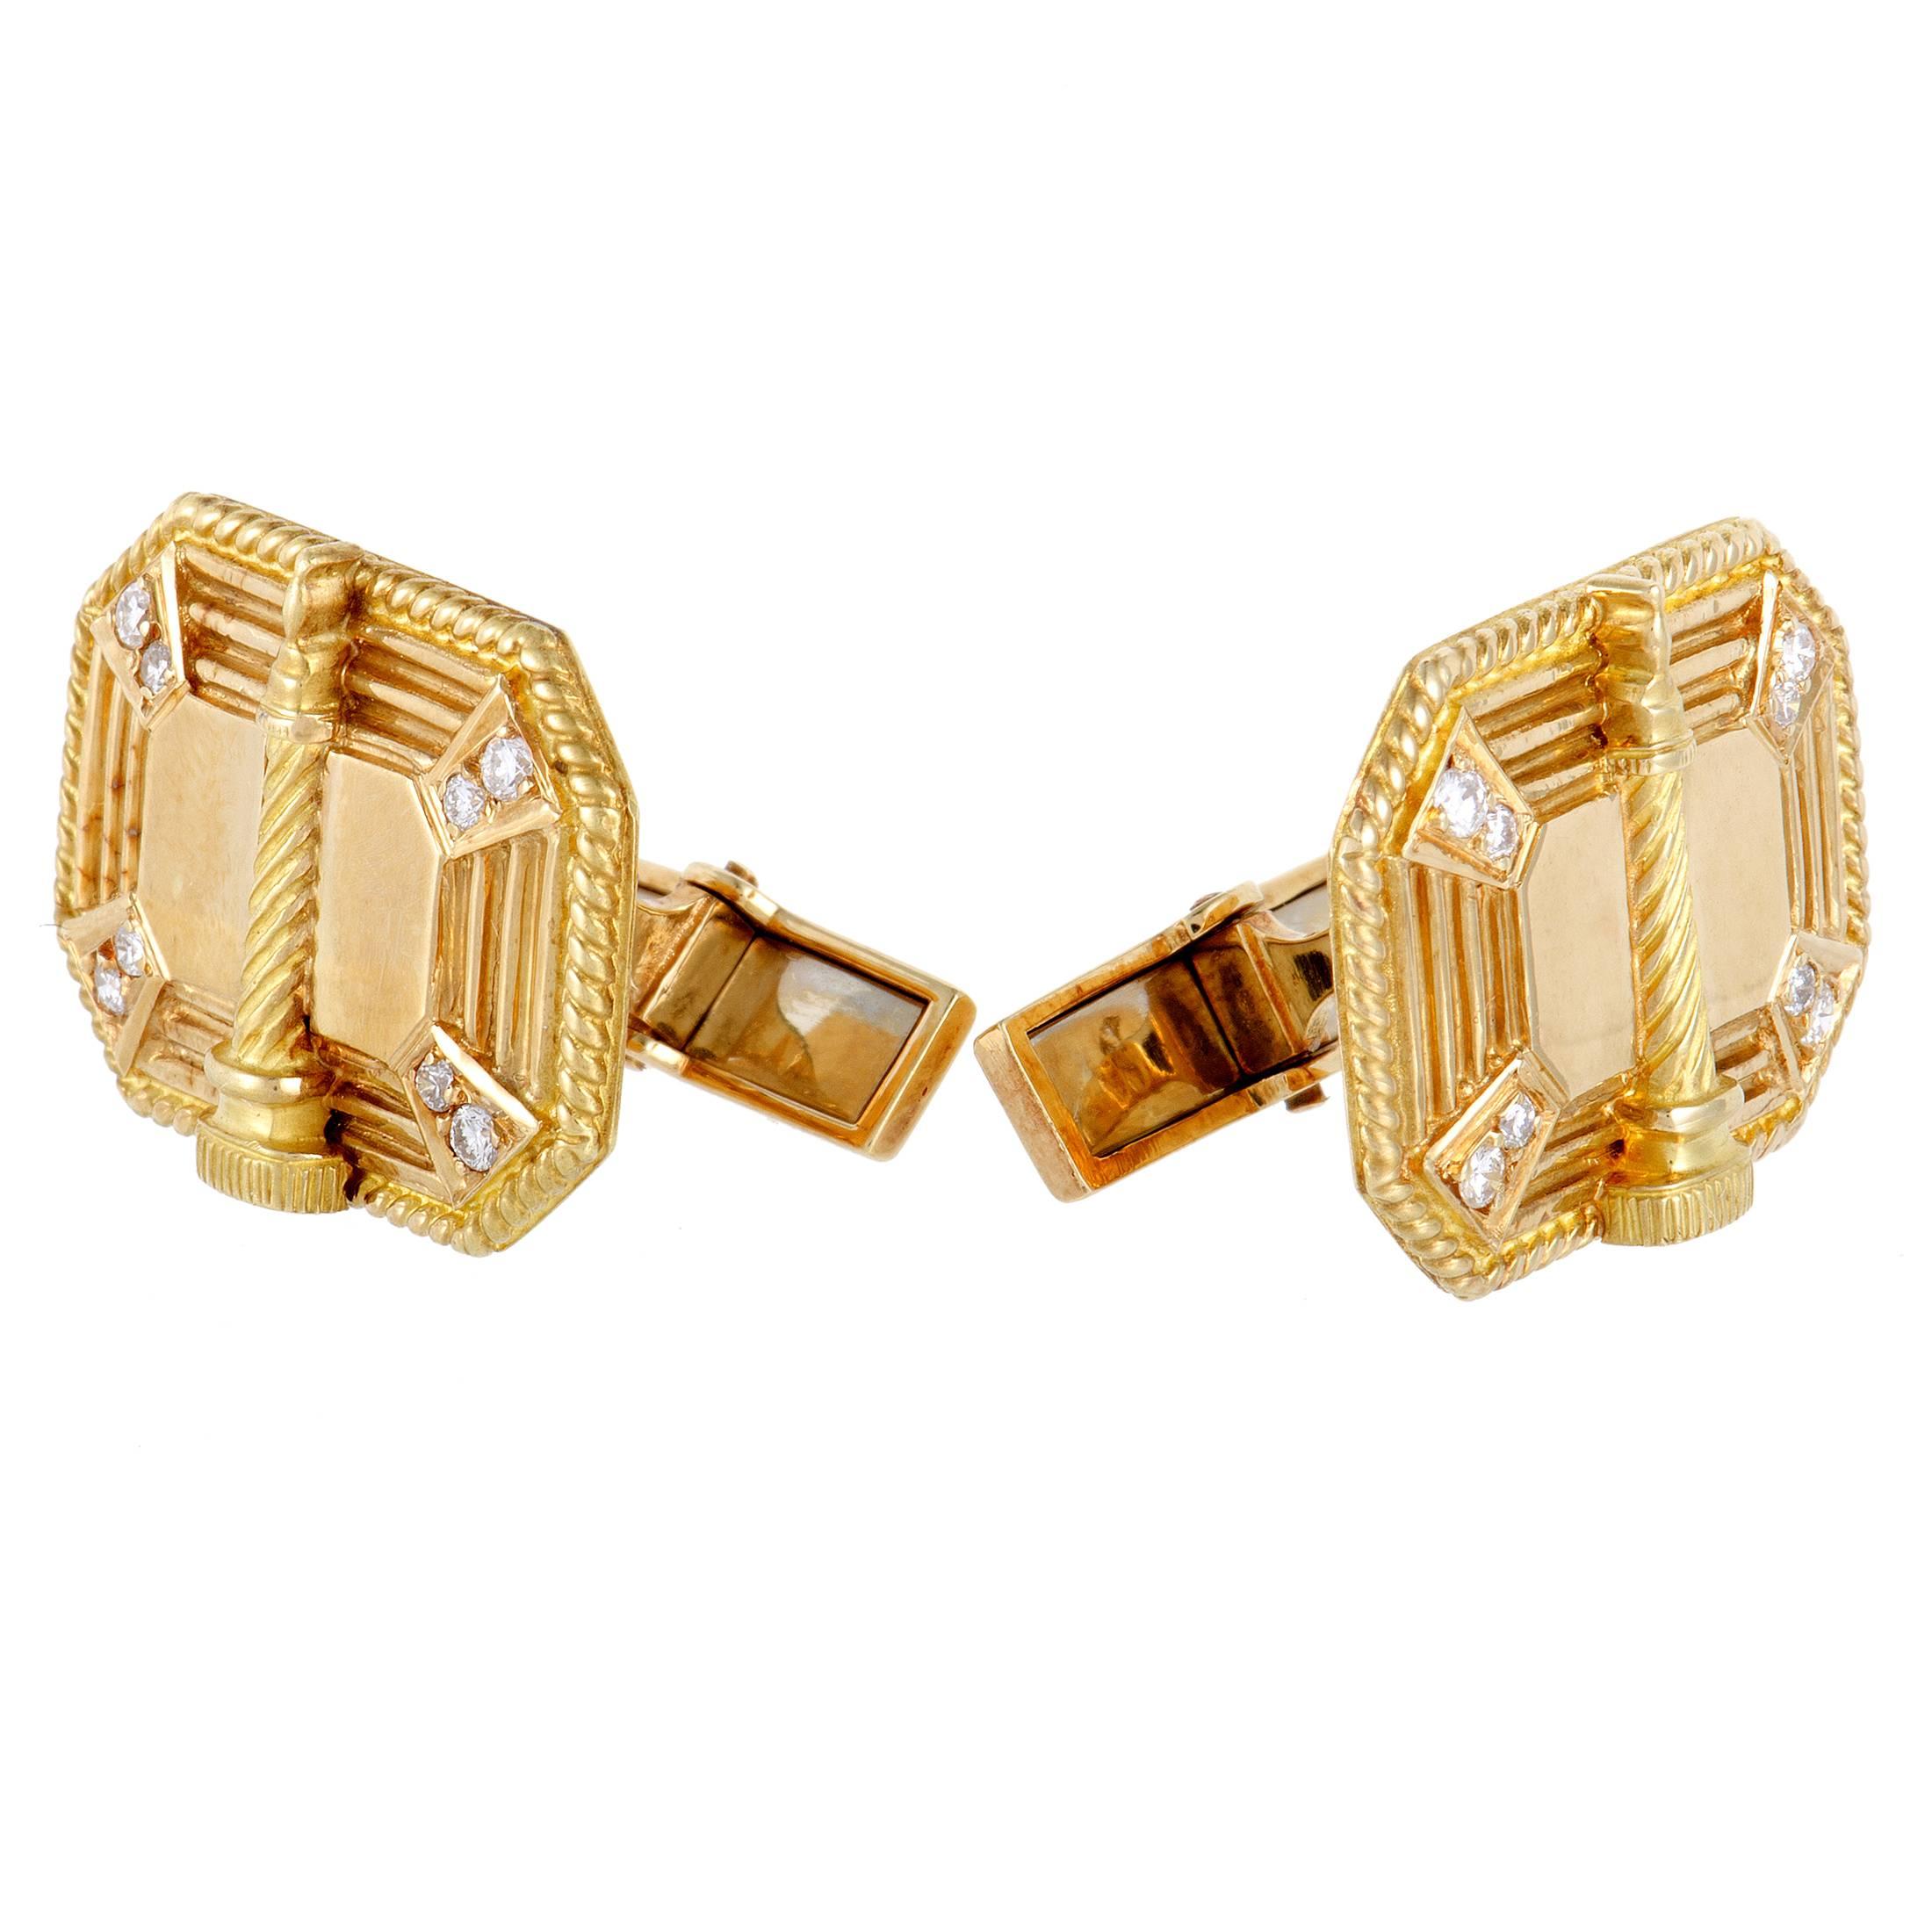 The intricate workings upon exuberant 18K yellow gold produce an aura of classic luxury in these fantastic cufflinks from Boucheron which are also set with glistening diamonds weighing in total 0.25ct for a splendid final touch.
Included Items: